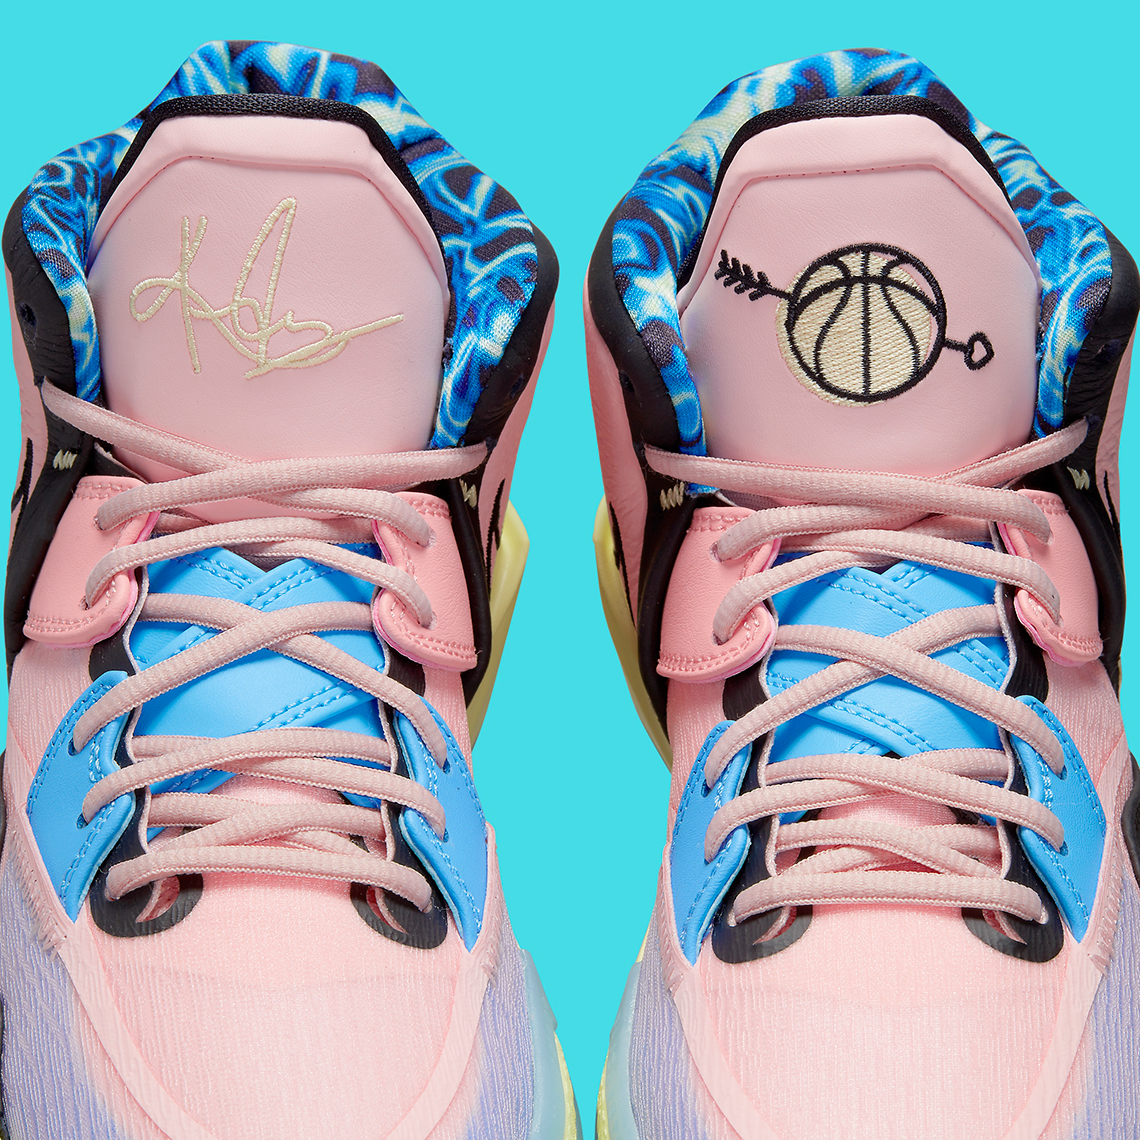 Nike Kyrie 8 Infinity Valentines Day Dh5385 900 Release Date 9